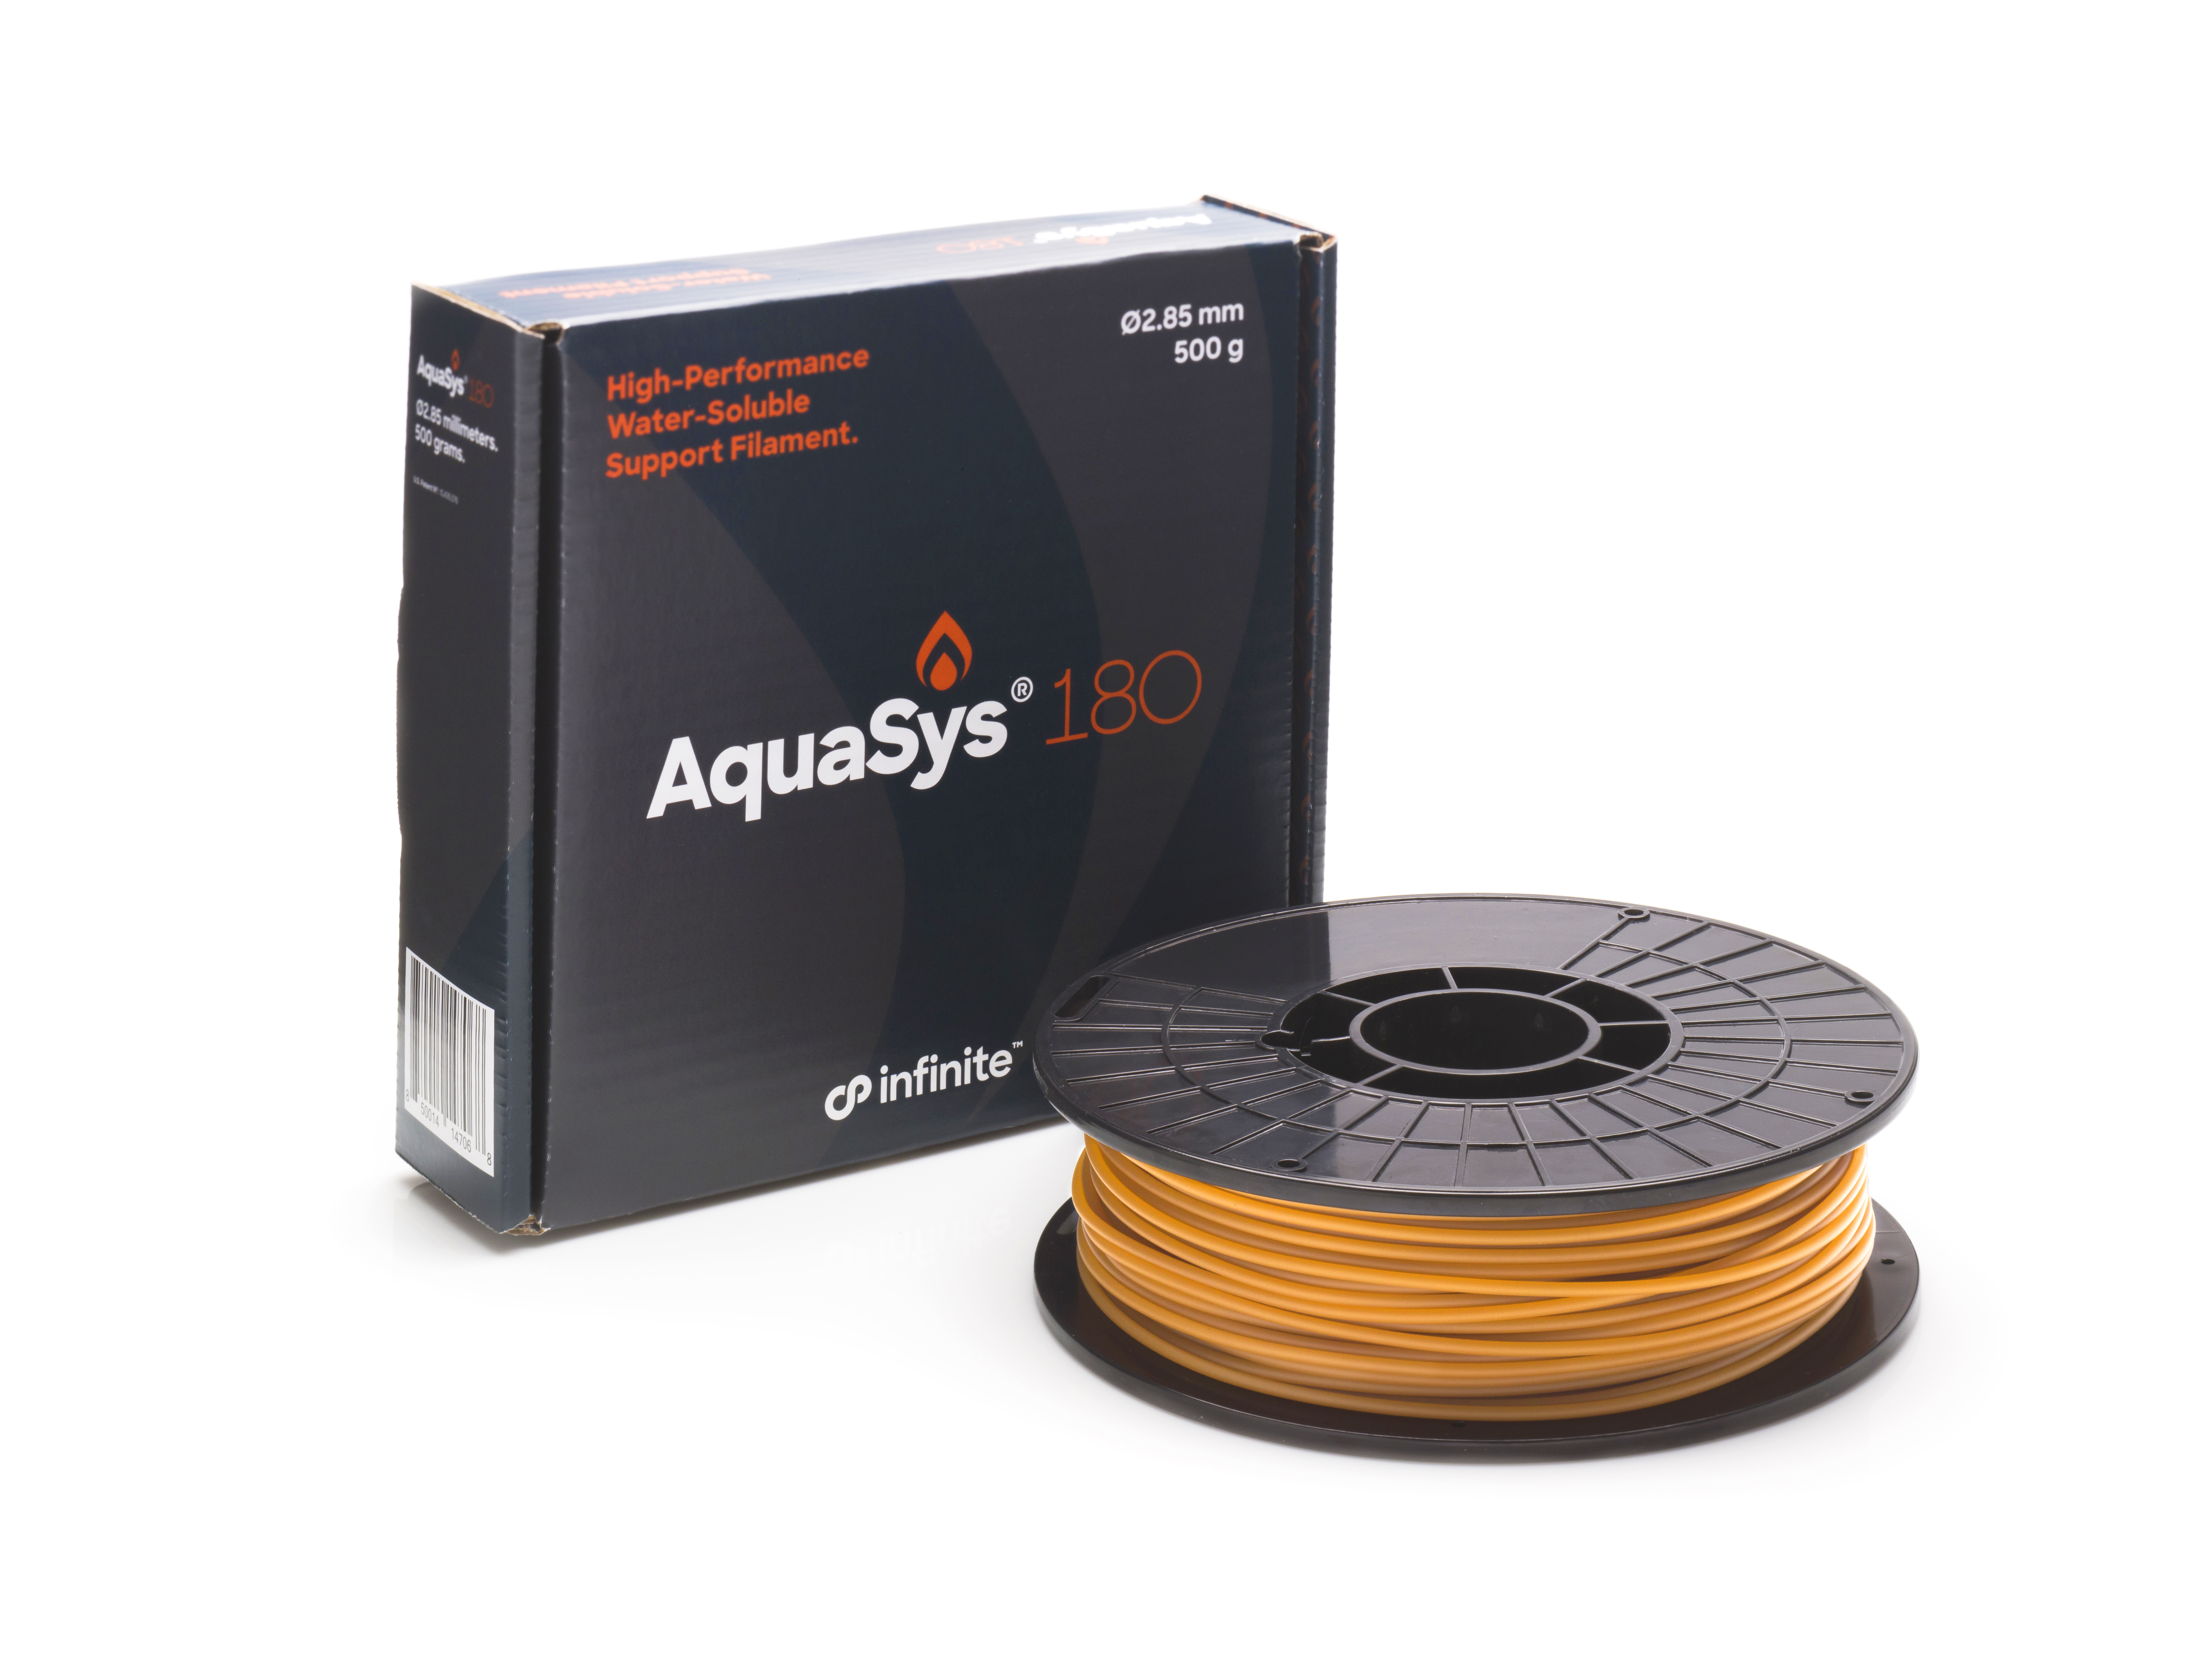 AquaSys 180 soluble support material. Photo via Infinite Material Solutions.